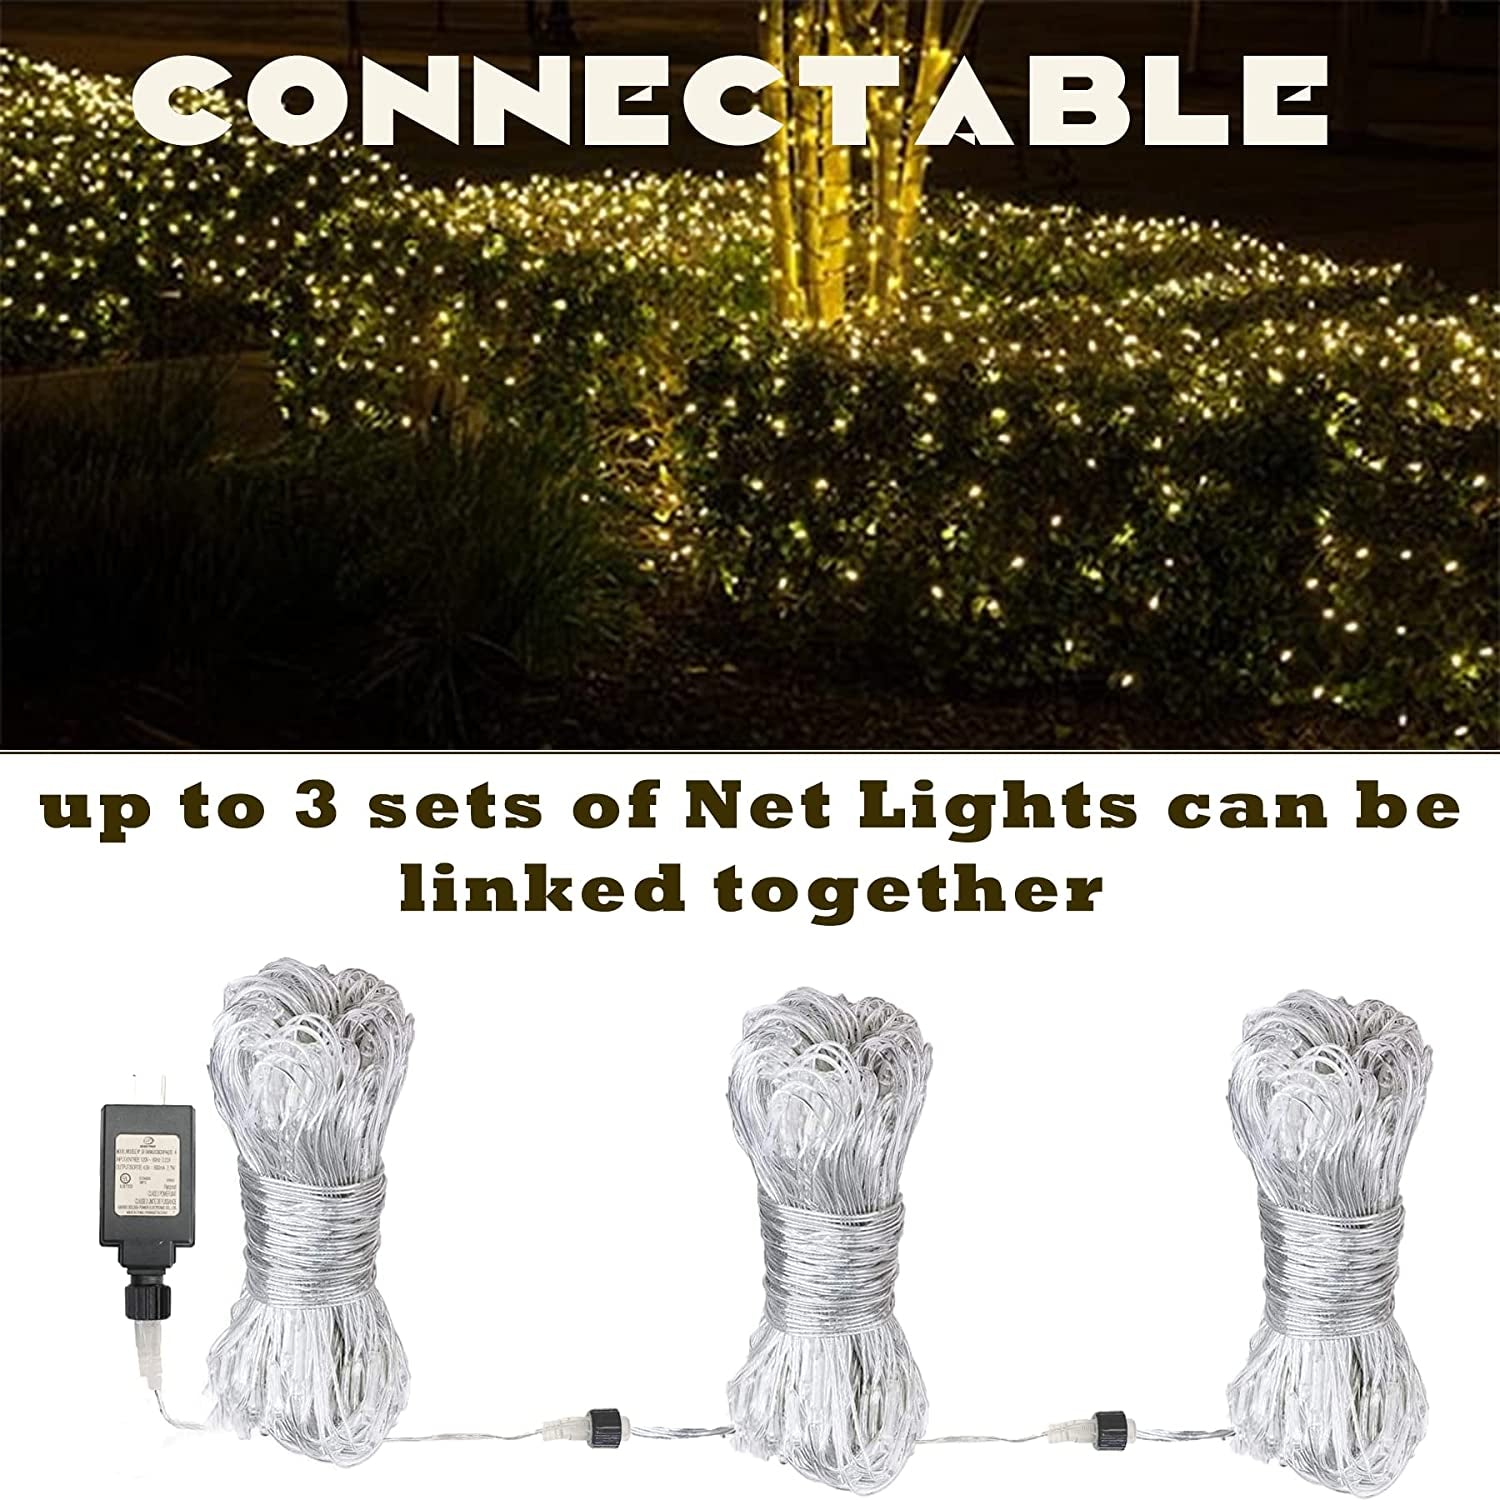 Outdoor Net Lights for Gazebo - 10ft × 10ft Mesh Lights with 270 Warm White LEDs, 8 Lighting Modes, Waterproof and Connectable - Ideal for Backyard, Garden, Holiday Decorations